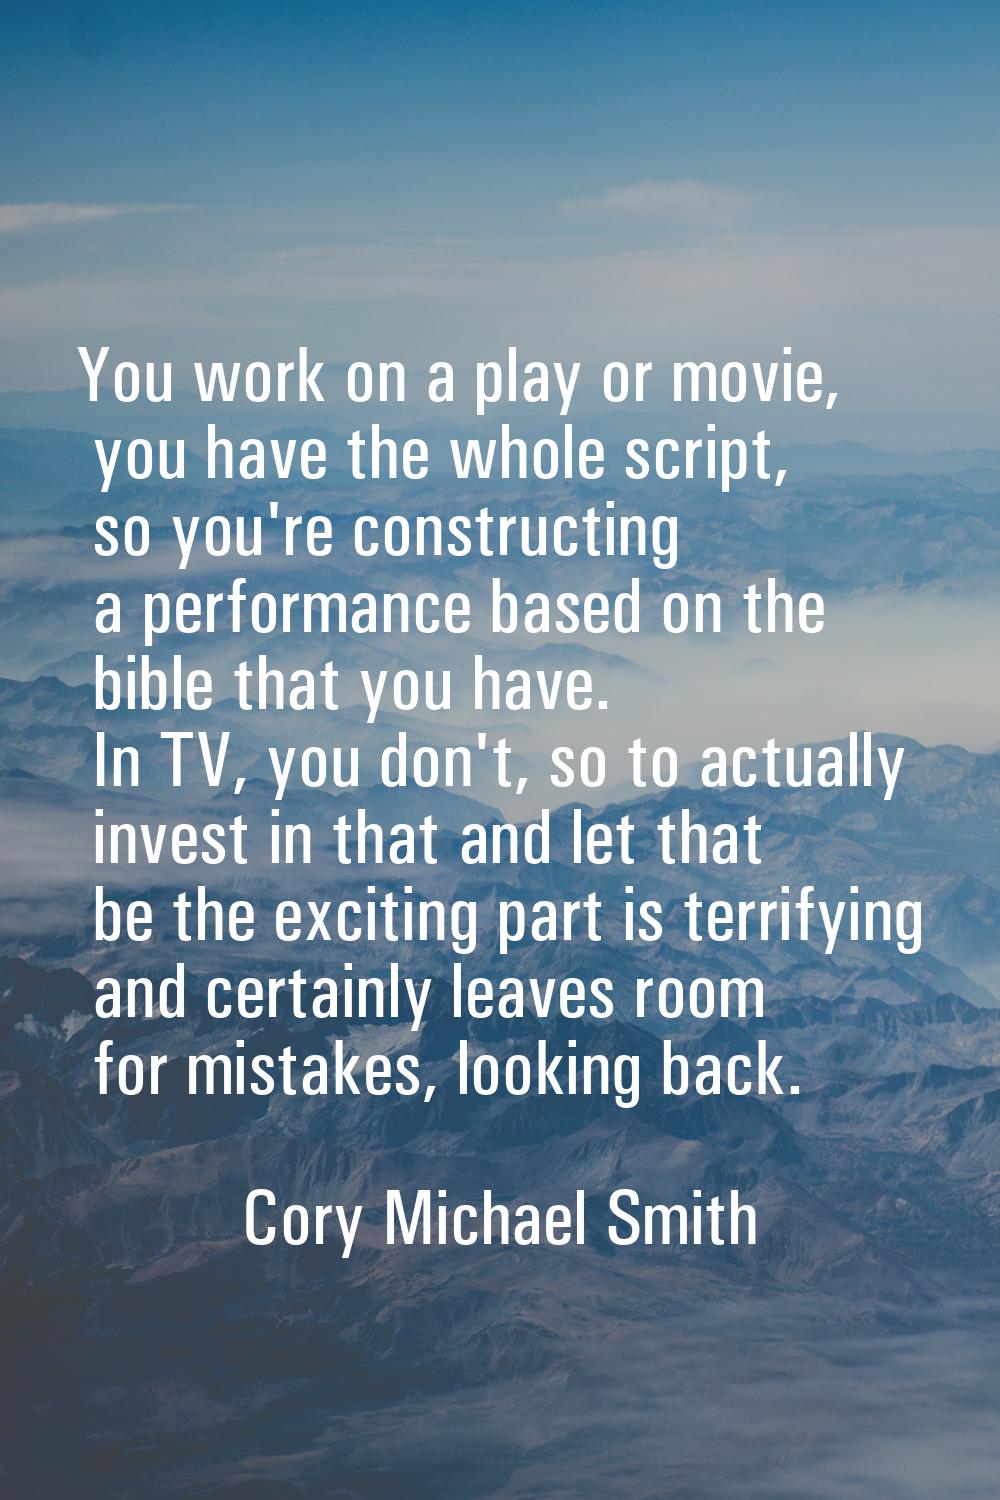 You work on a play or movie, you have the whole script, so you're constructing a performance based 